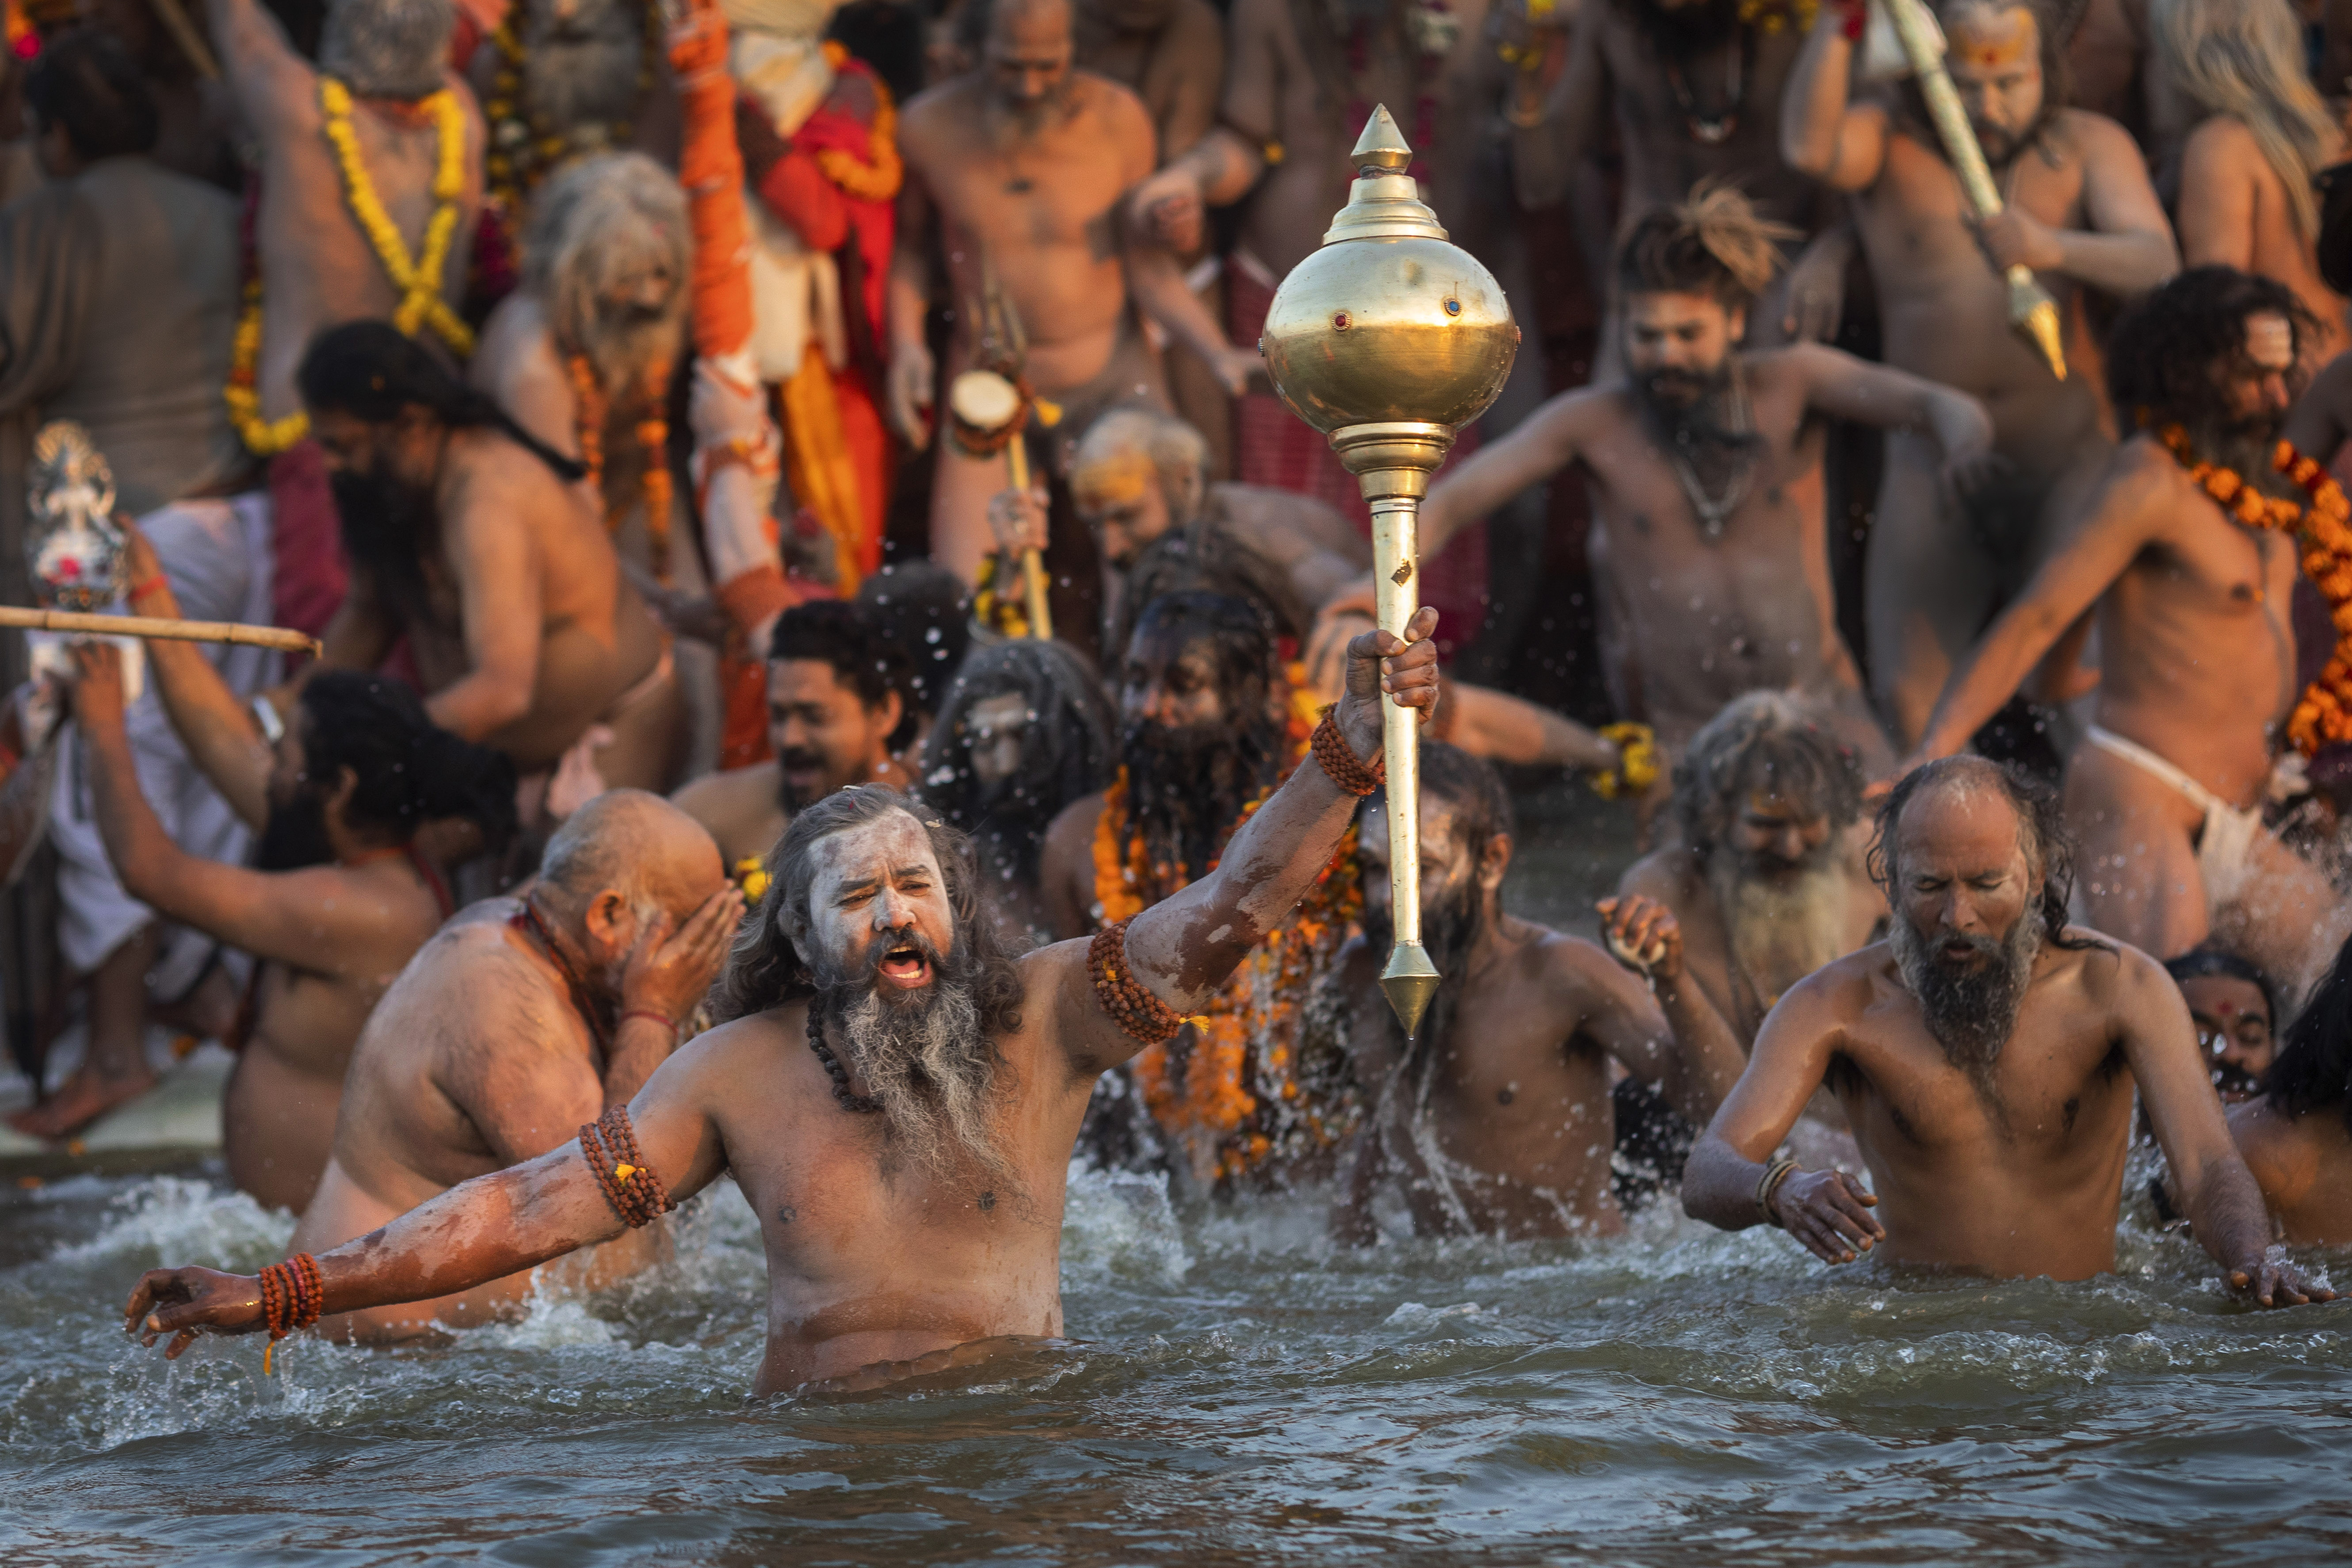 Hindu holy men take a dip on auspicious Makar Sankranti day during the Kumbh Mela, or pitcher festival in Prayagraj, Uttar Pradesh state, India, Tuesday, Jan.15, 2019. The Kumbh Mela is a series of ritual baths by Hindu holy men, and other pilgrims at the confluence of three sacred rivers the Yamuna, the Ganges and the mythical Saraswati that dates back to at least medieval times. The city's Mughal-era name Allahabad was recently changed to Prayagraj. (AP Photo/Bernat Armangue)